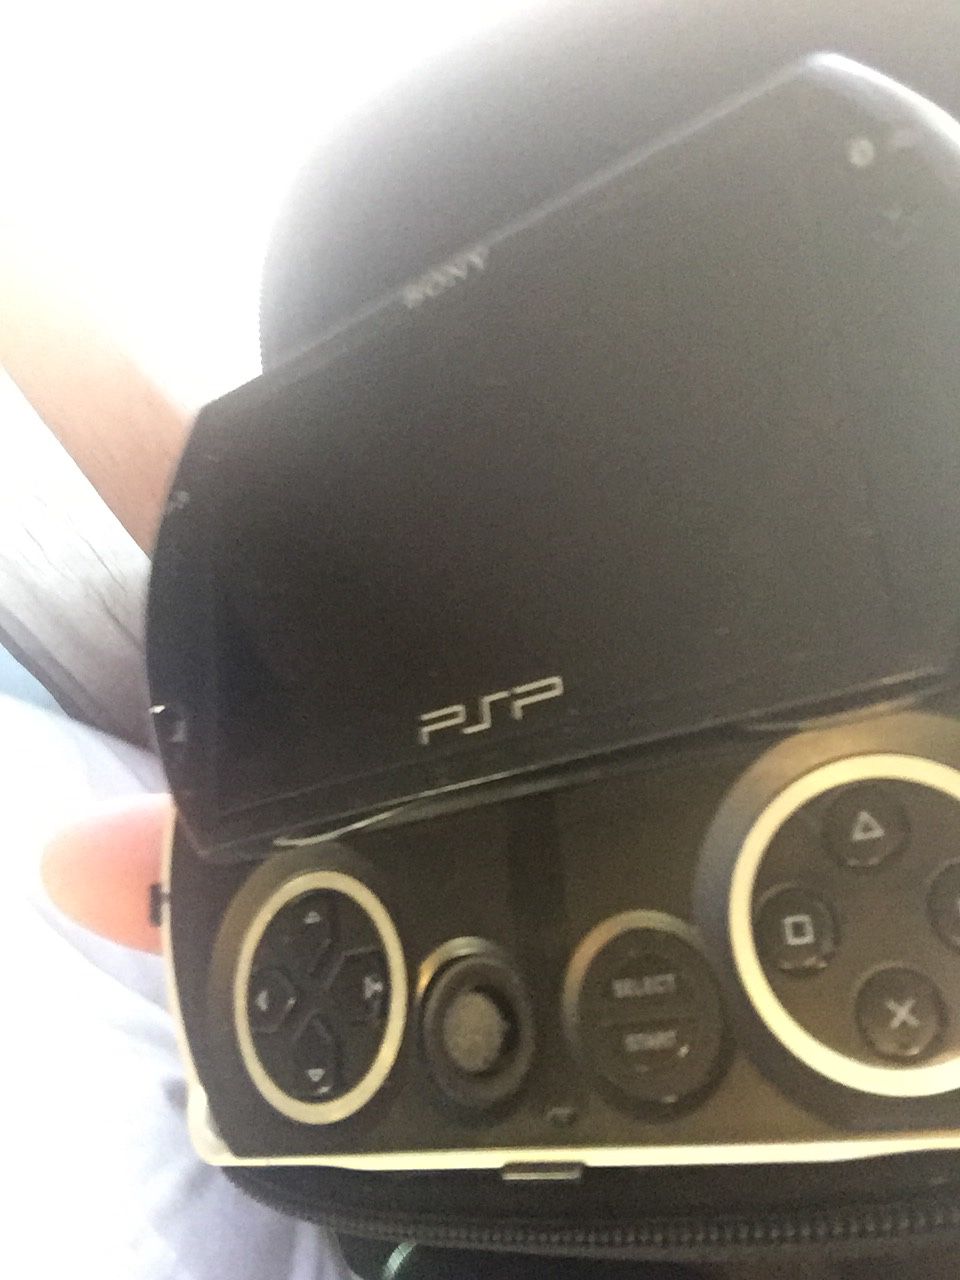 PSP go works good just needs charger